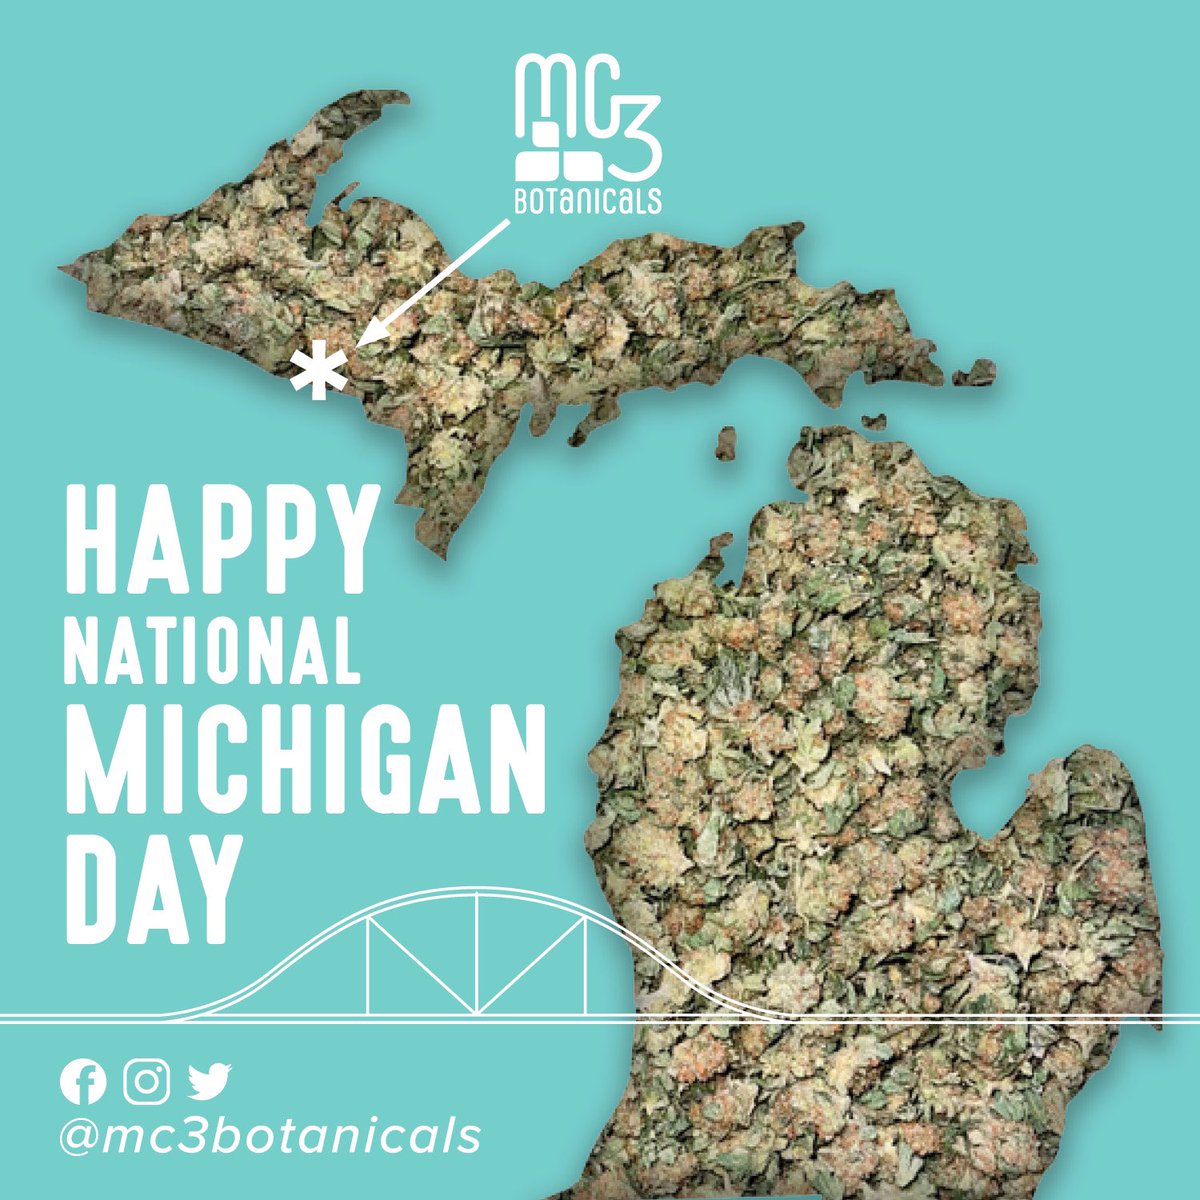 Happy National Michigan Day! Celebrating Michigan’s industrious spirit, natural beauty and craft cannabis. Support your Michigan craft growers! #mc3botanicals #craftcannabis #yoopergrown #carefullycultivated #womenowned #handtrimmed #handcrafted #michigangrown #yeswecannabis